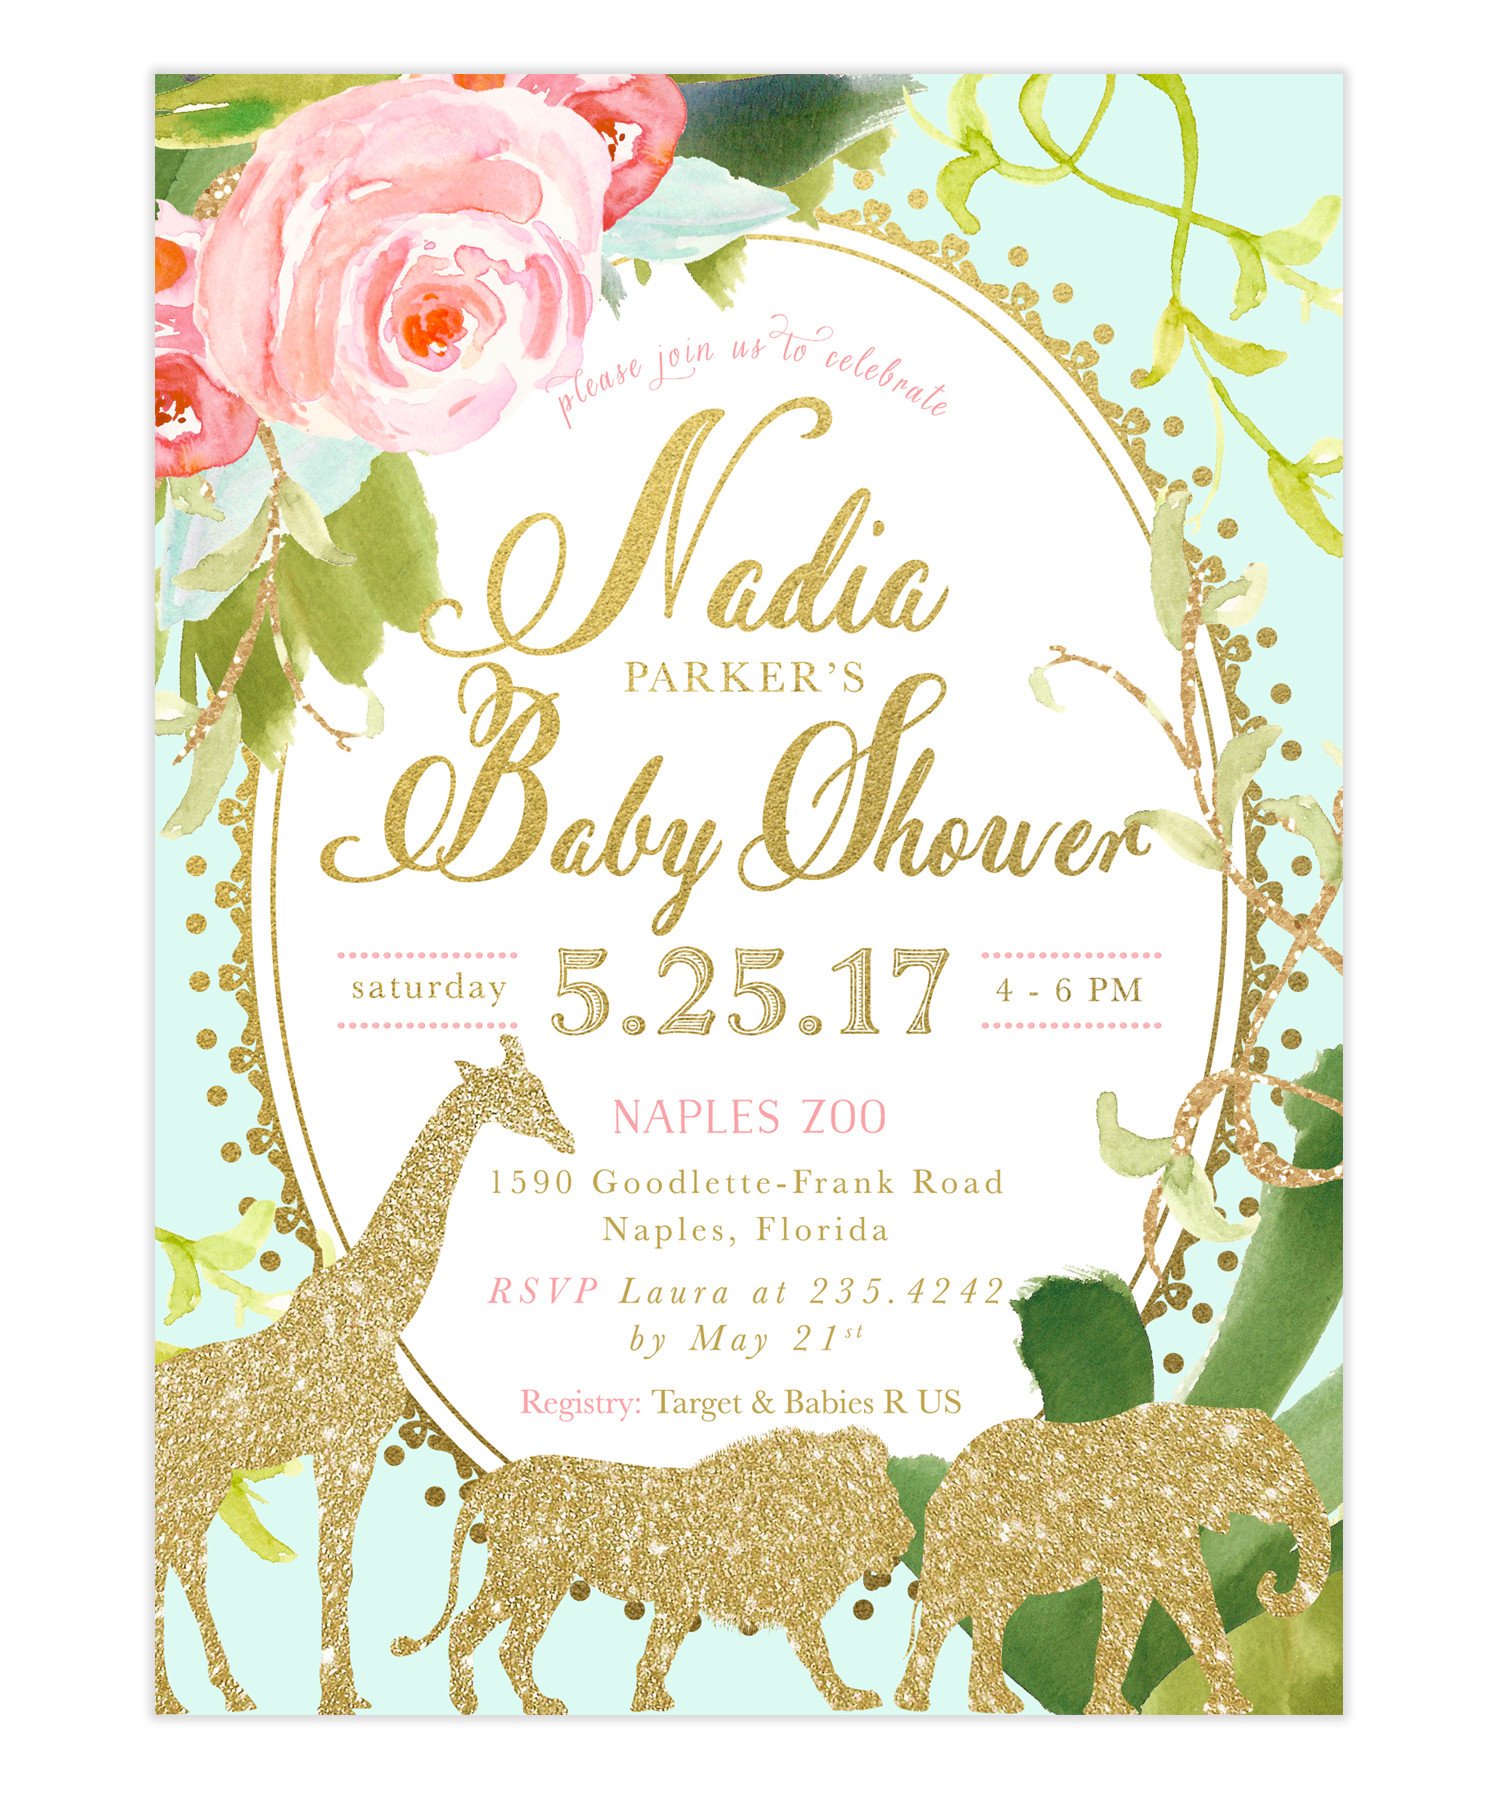 Full Size of Baby Shower:nursery Themes For Girls Baby Girl Party Plates Girl Baby Shower Decorations Baby Shower Decorations For Girls Homemade Baby Shower Decorations Unique Baby Shower Themes Nautical Baby Shower Invitations For Boys Printable Baby Shower Invitations For Girl